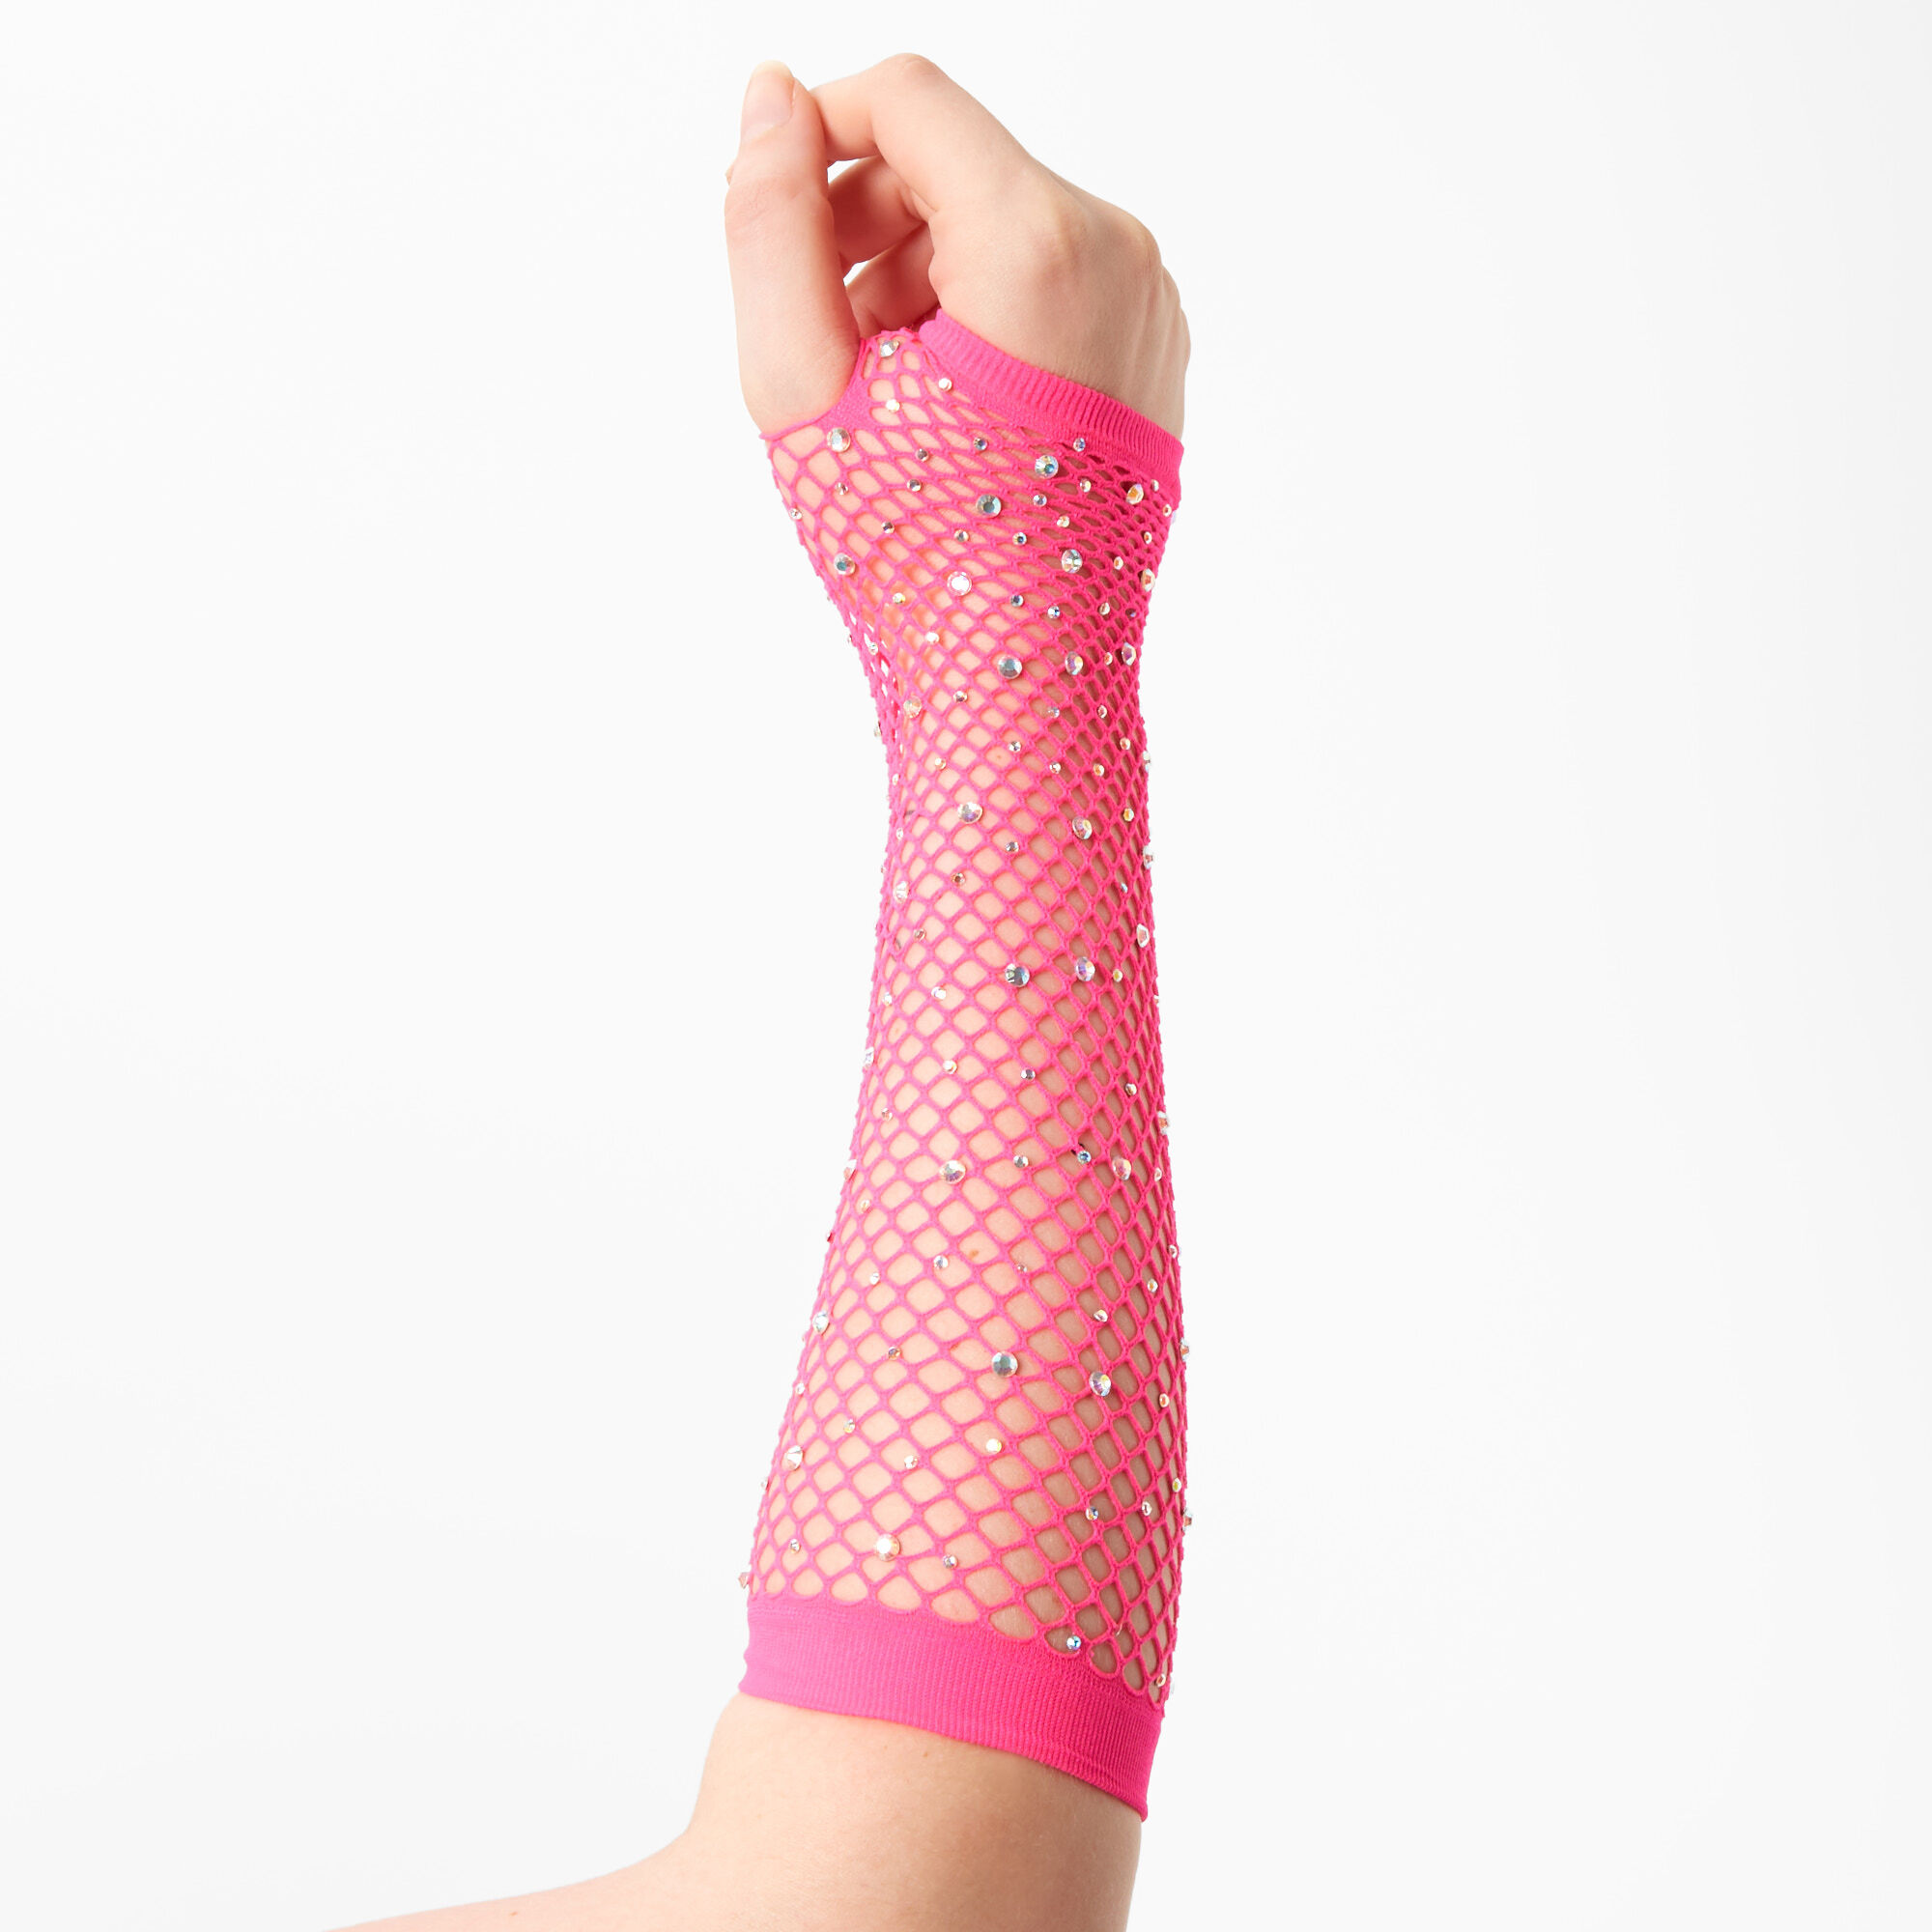 View Claires Rhinestone Fishnet Arm Warmers Pink information